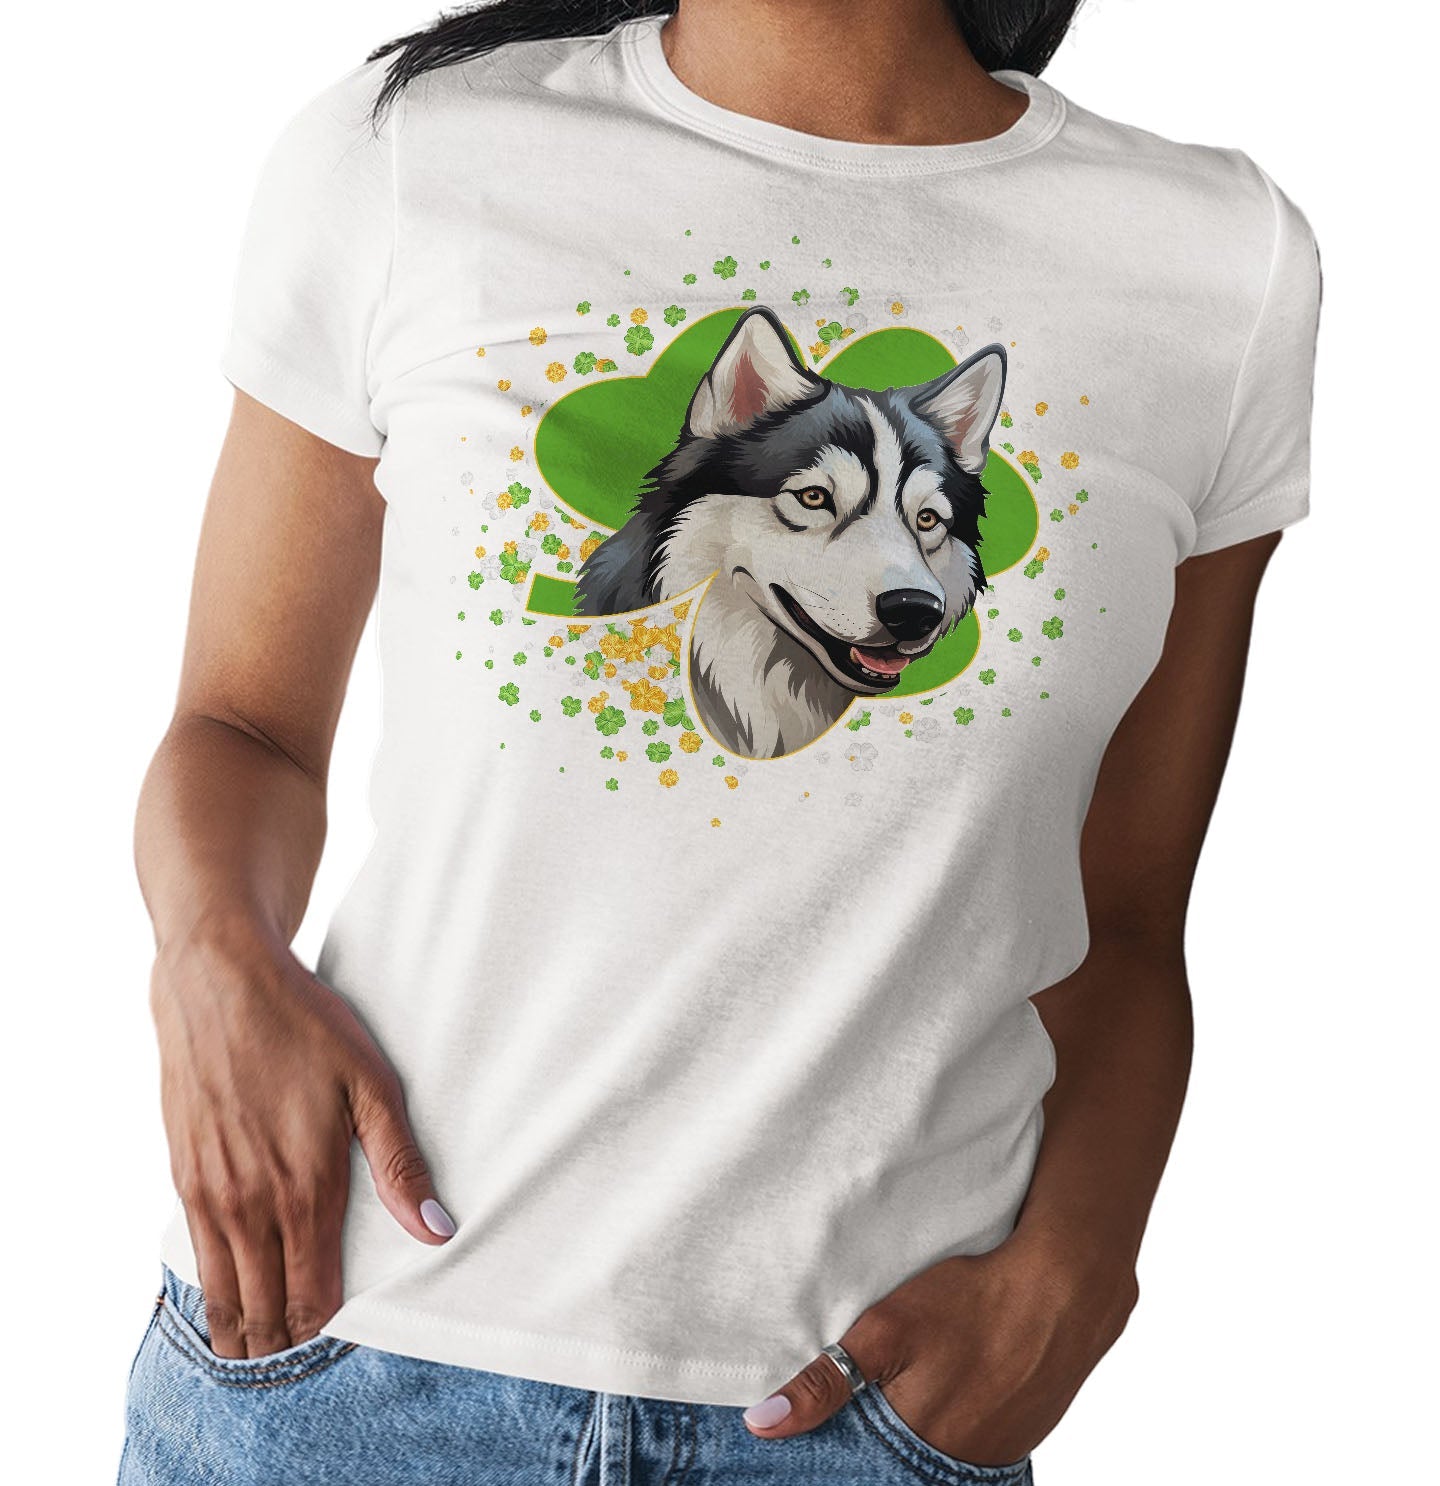 Big Clover St. Patrick's Day Siberian Husky - Women's Fitted T-Shirt